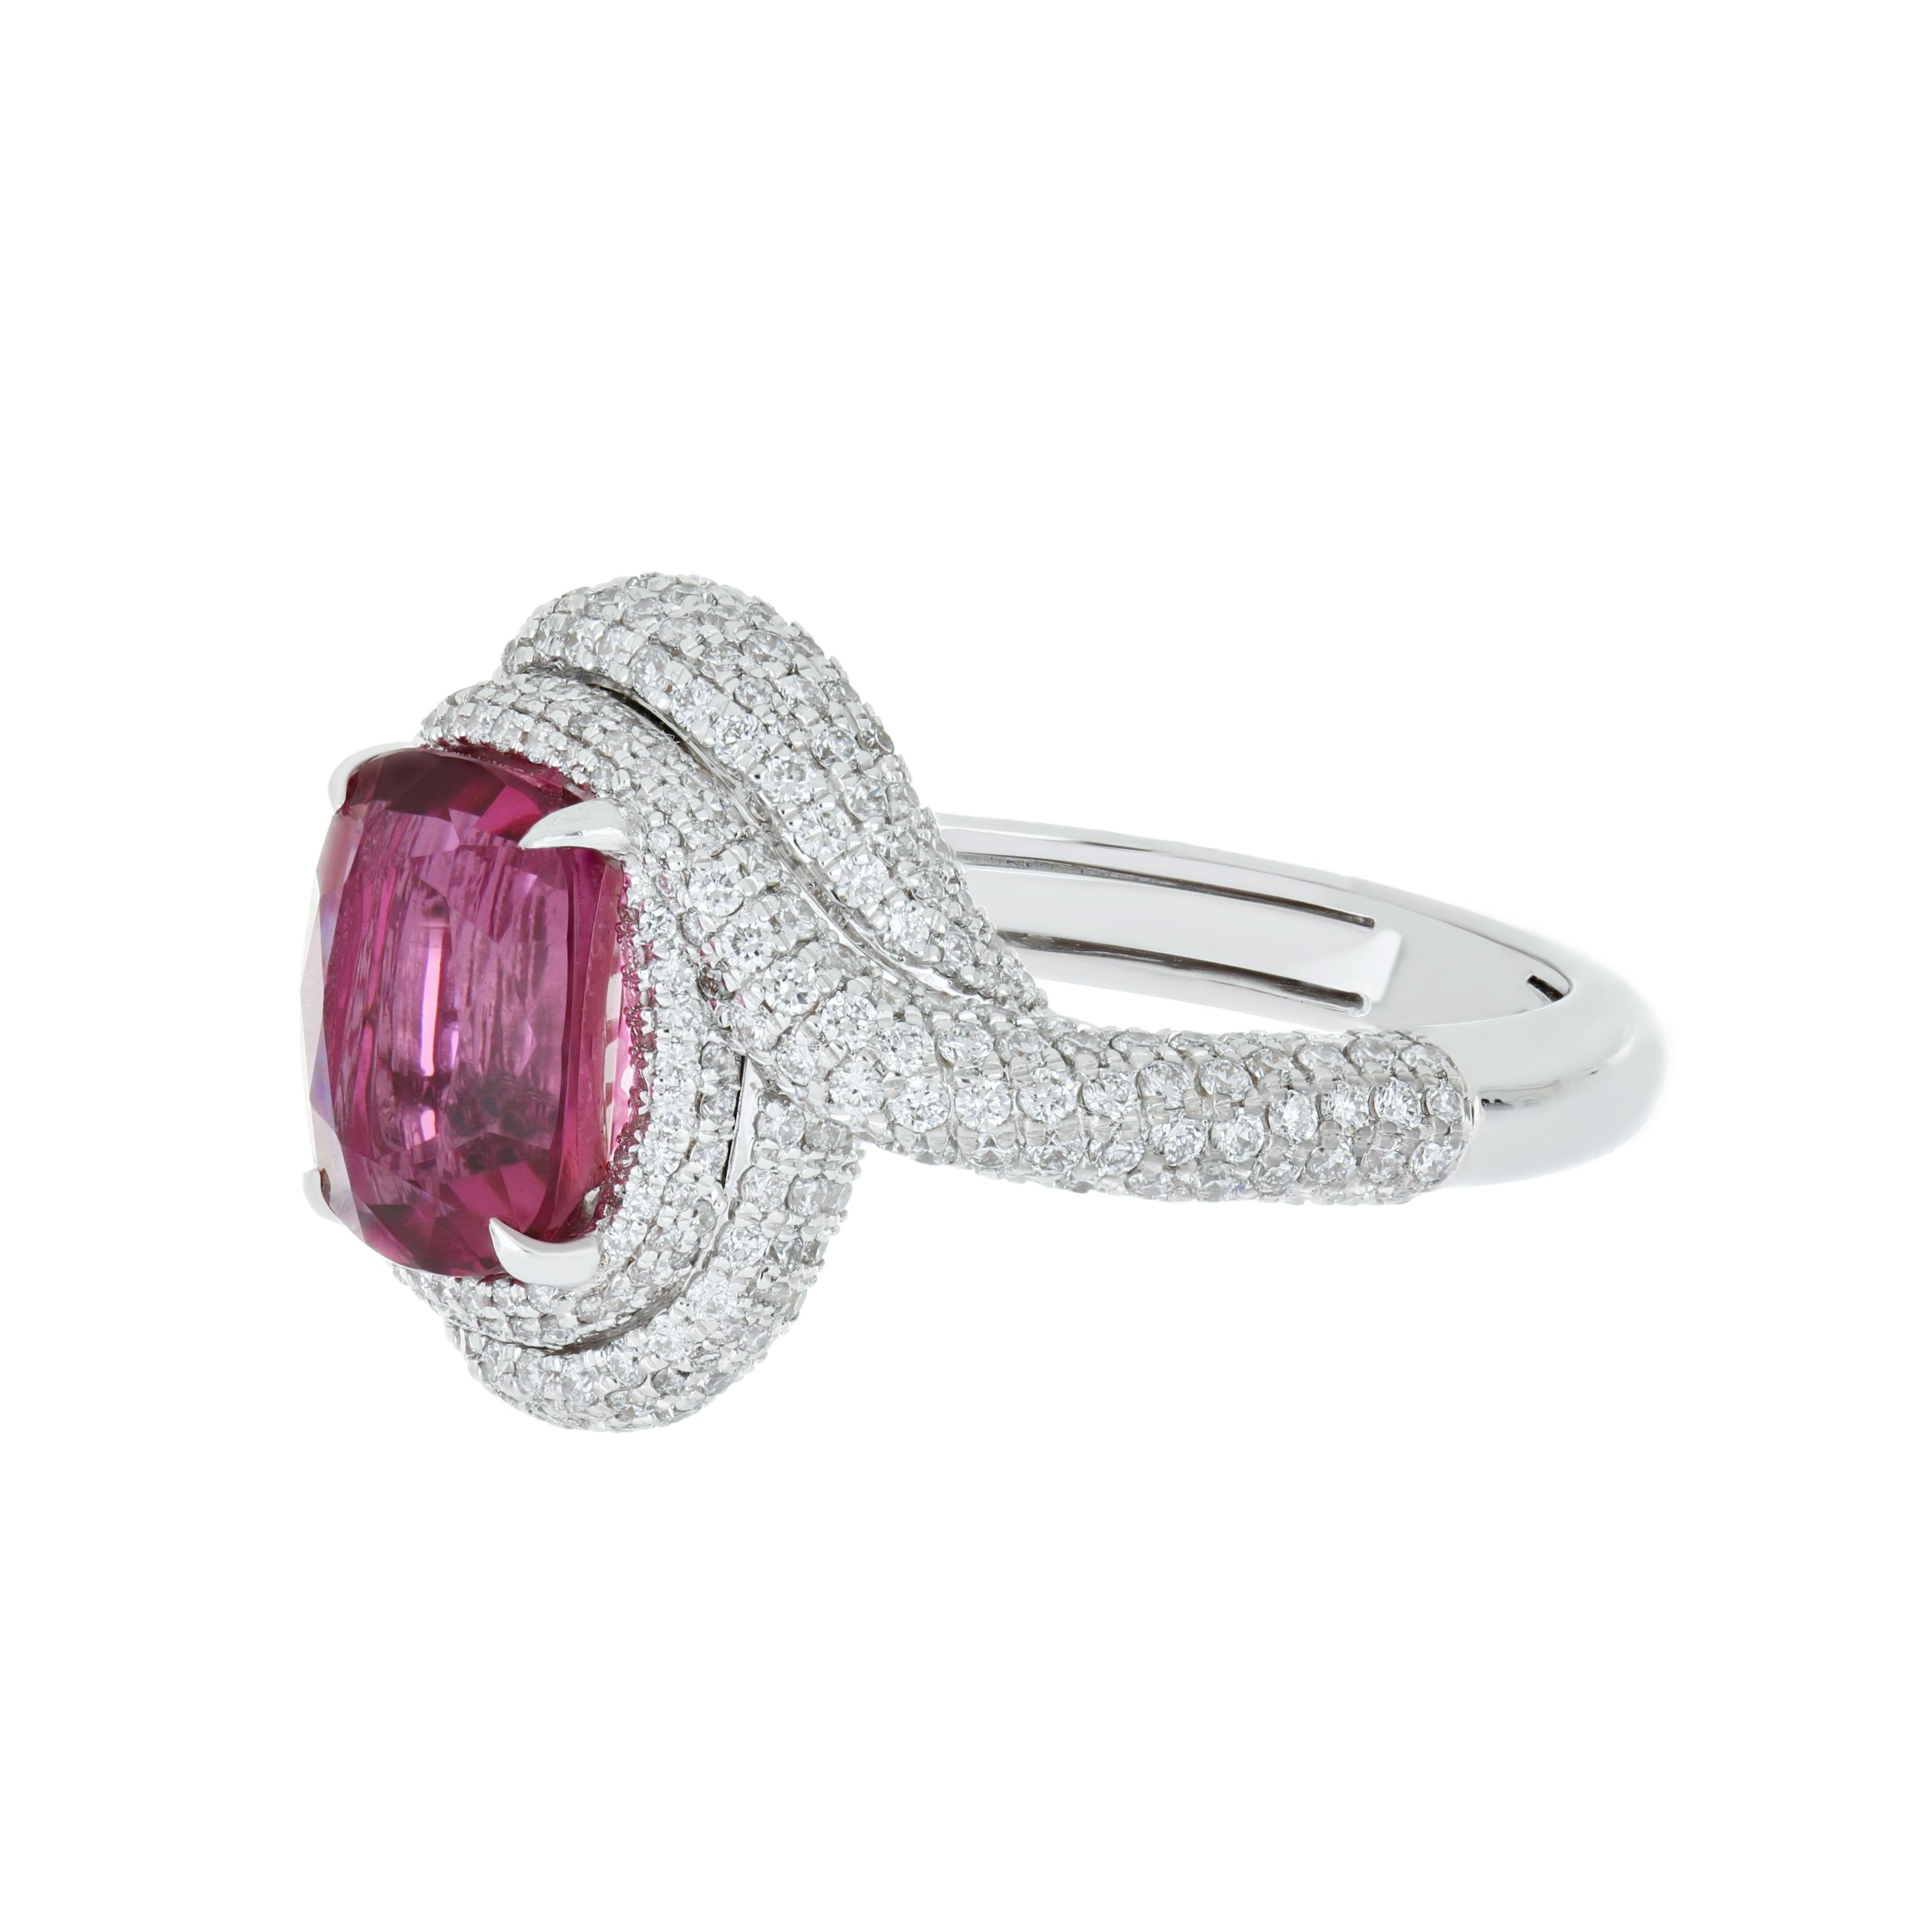 Cushion Cut 4.05 Carats Rubellite and Diamond Studded Ring in 18K White Gold Ring For Sale